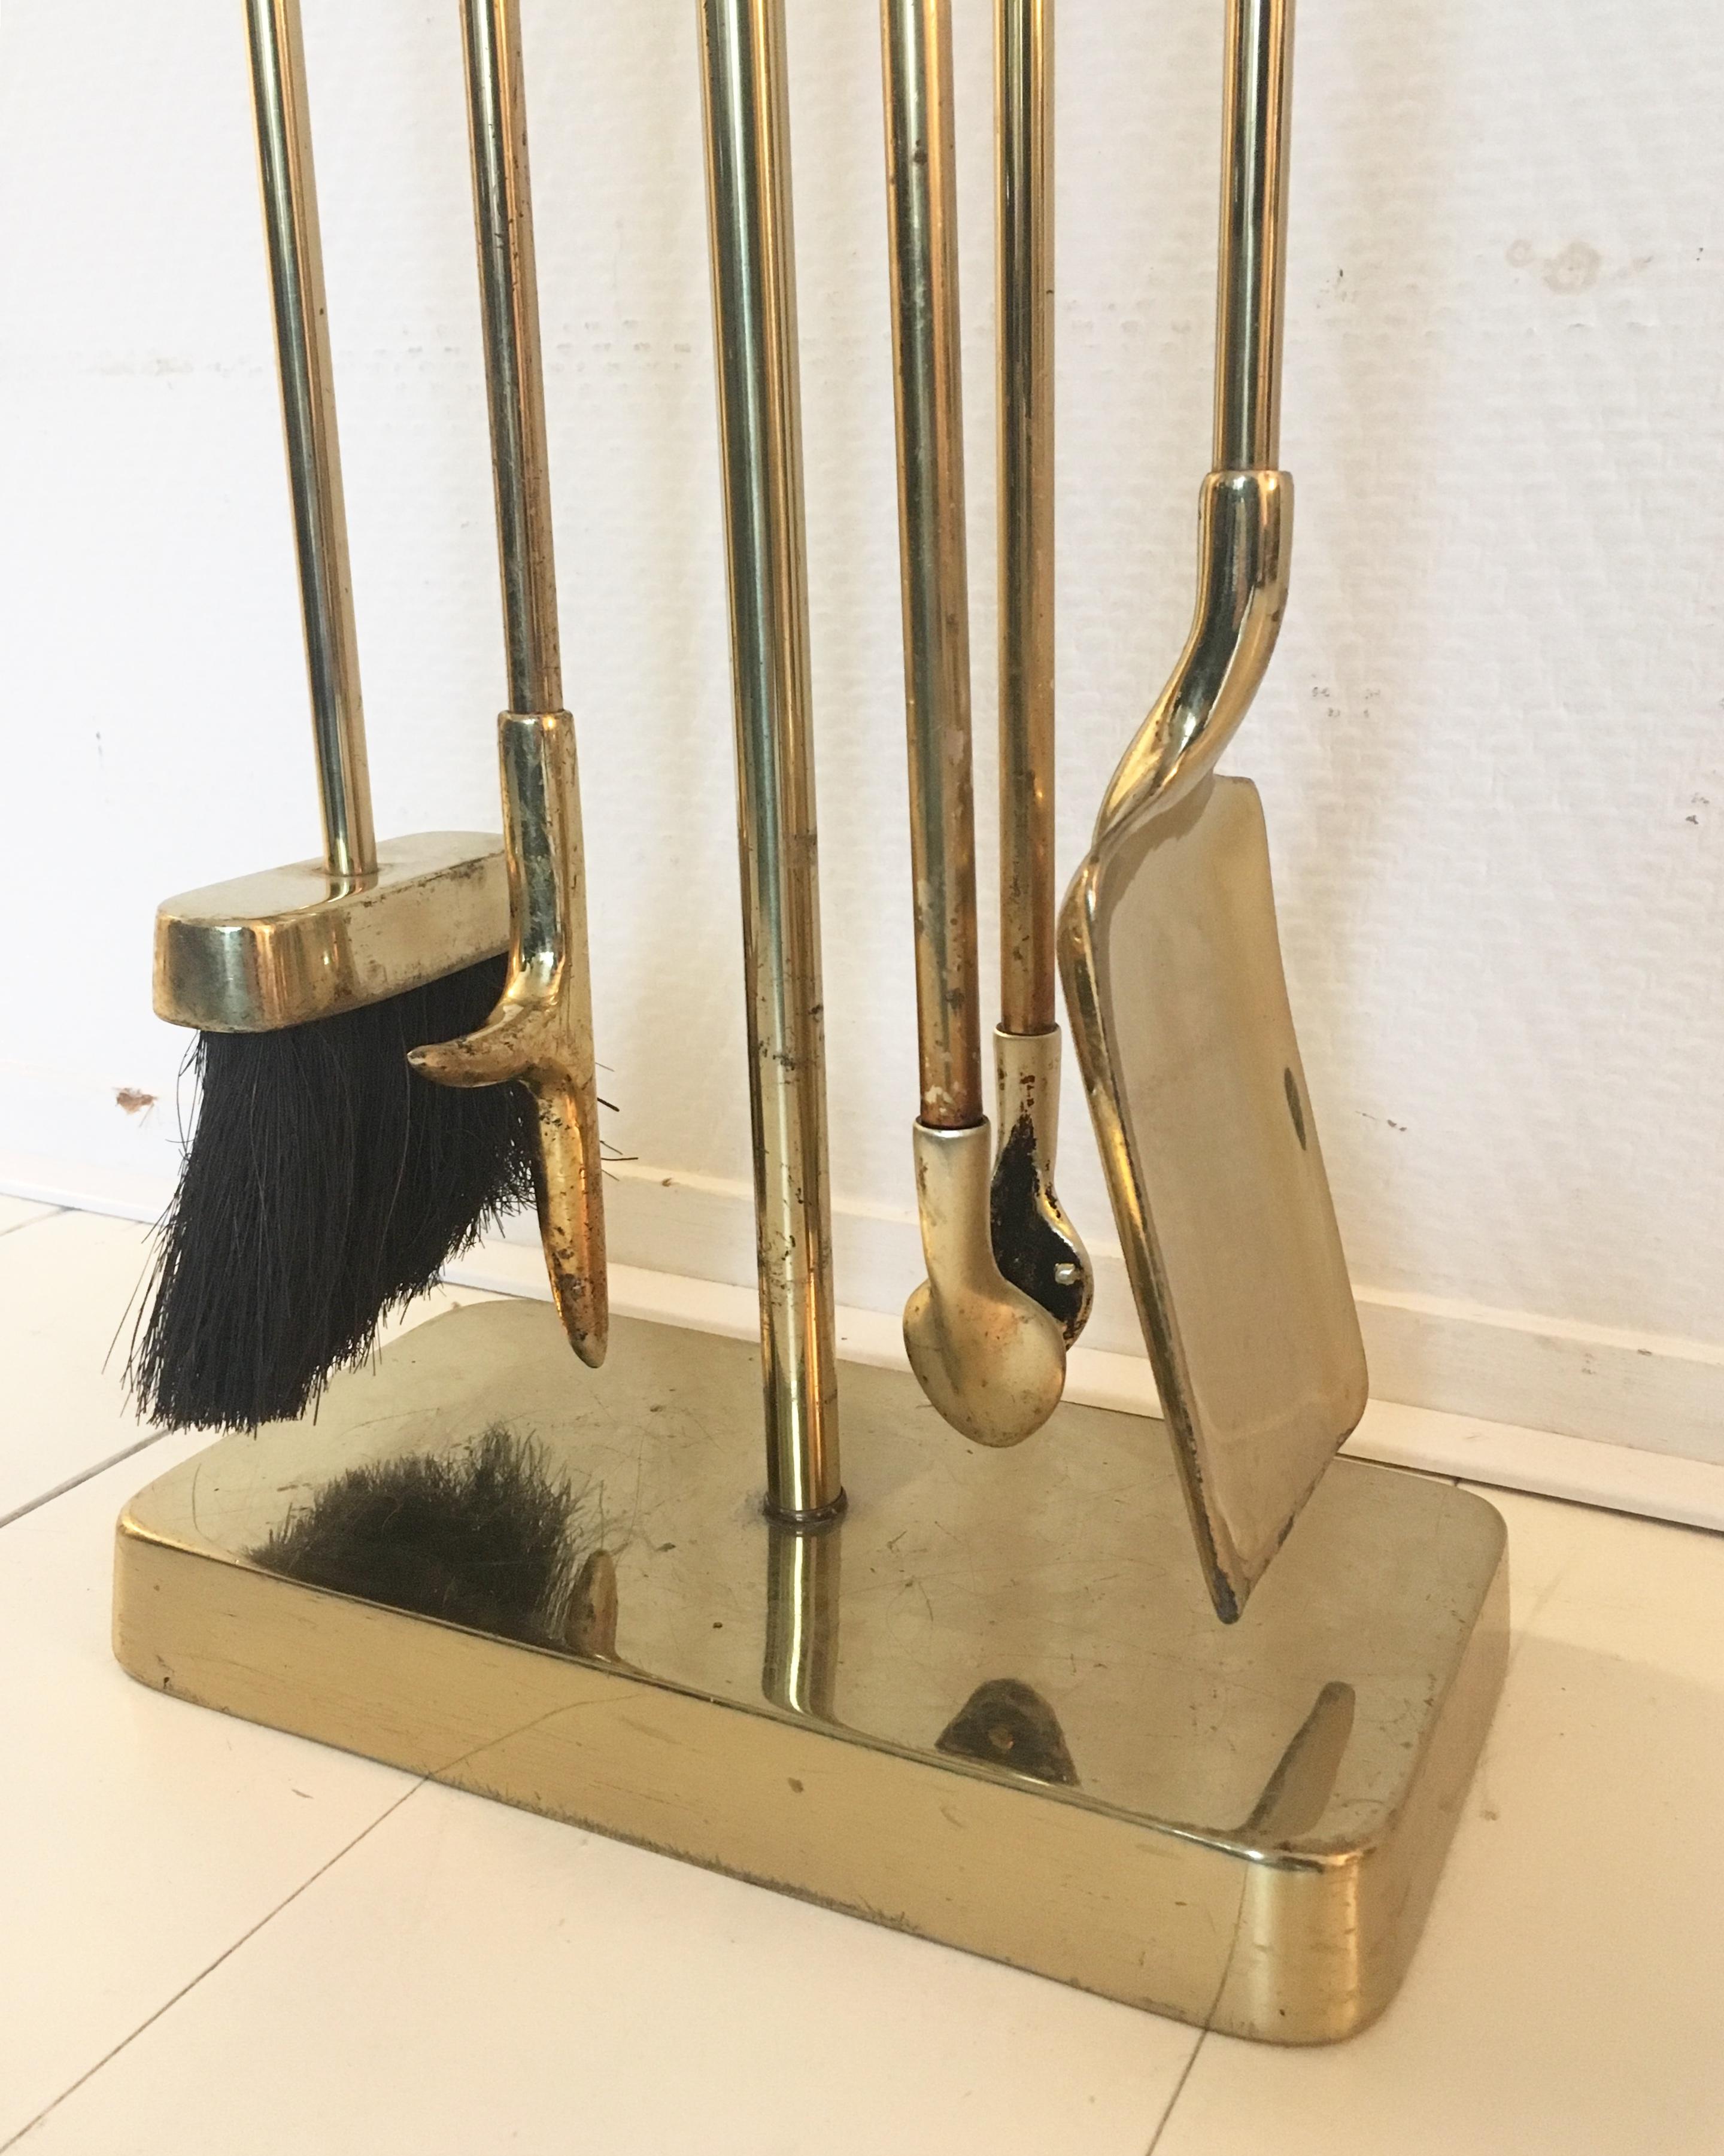 Unknown FKNR Brass Set of Fire Tools with Stand, 1970s